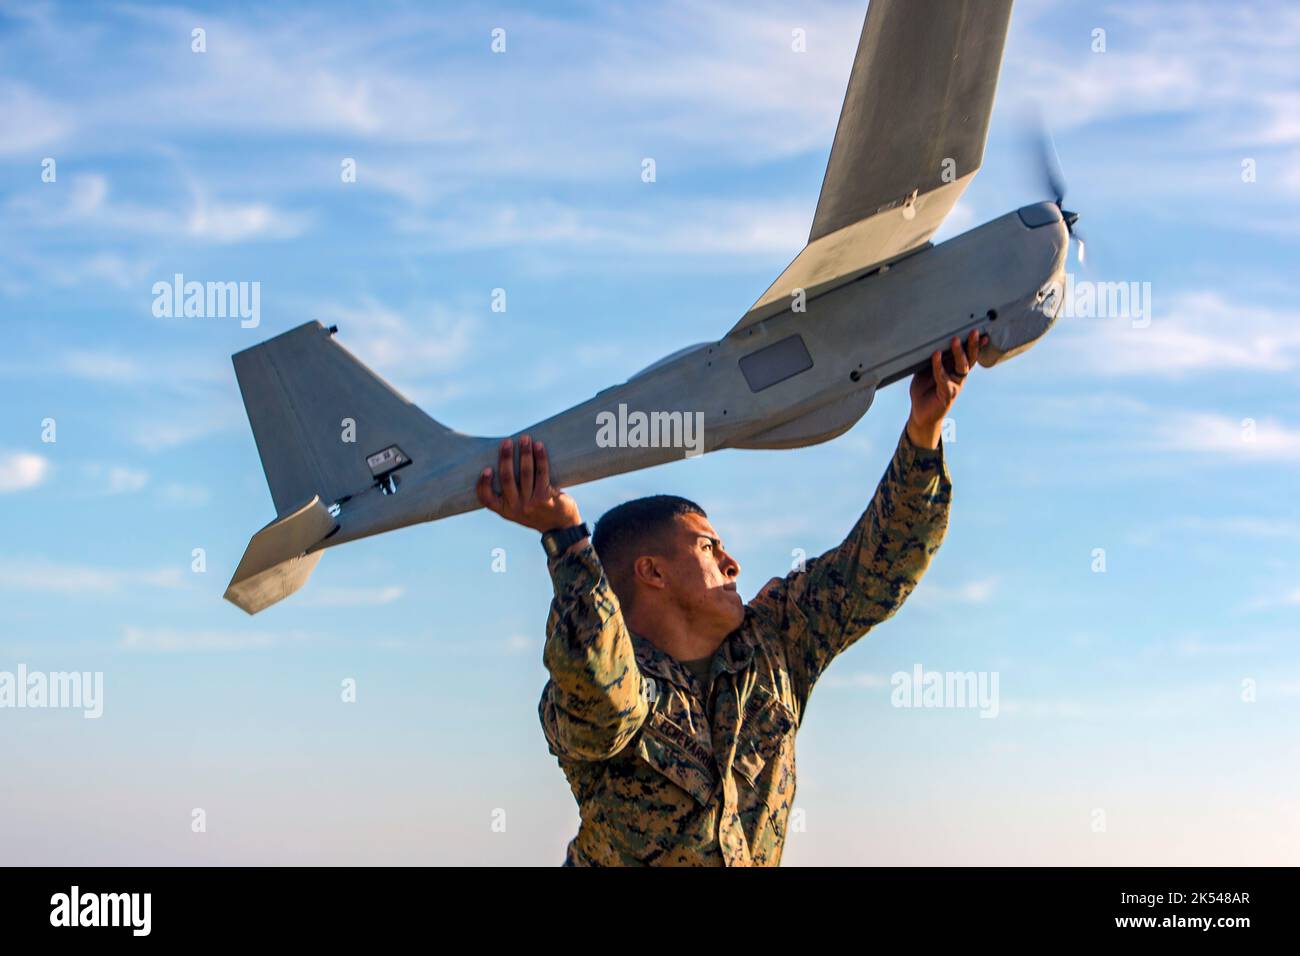 U.S. Marine Corps Lance Cpl. Daniel Echevarria, intelligence analyst, 2nd Battalion, 4th Marine Regiment, 1st Marine Division, launches an RQ-20B Puma drone during Operation Wild Buck (OWB) at Marine Corps Base, Camp Pendleton, Dec. 18, 2018. OWB is a proof of concept exercise designed to demonstrate the potential employment of multiple-integrated unmanned aerial systems for the purposes of tracking missing or unauthorized personnel, animals and in response during wildfires or disasters. (U.S. Marine Corps photo by Cpl. Emmanuel Necoechea) Stock Photo